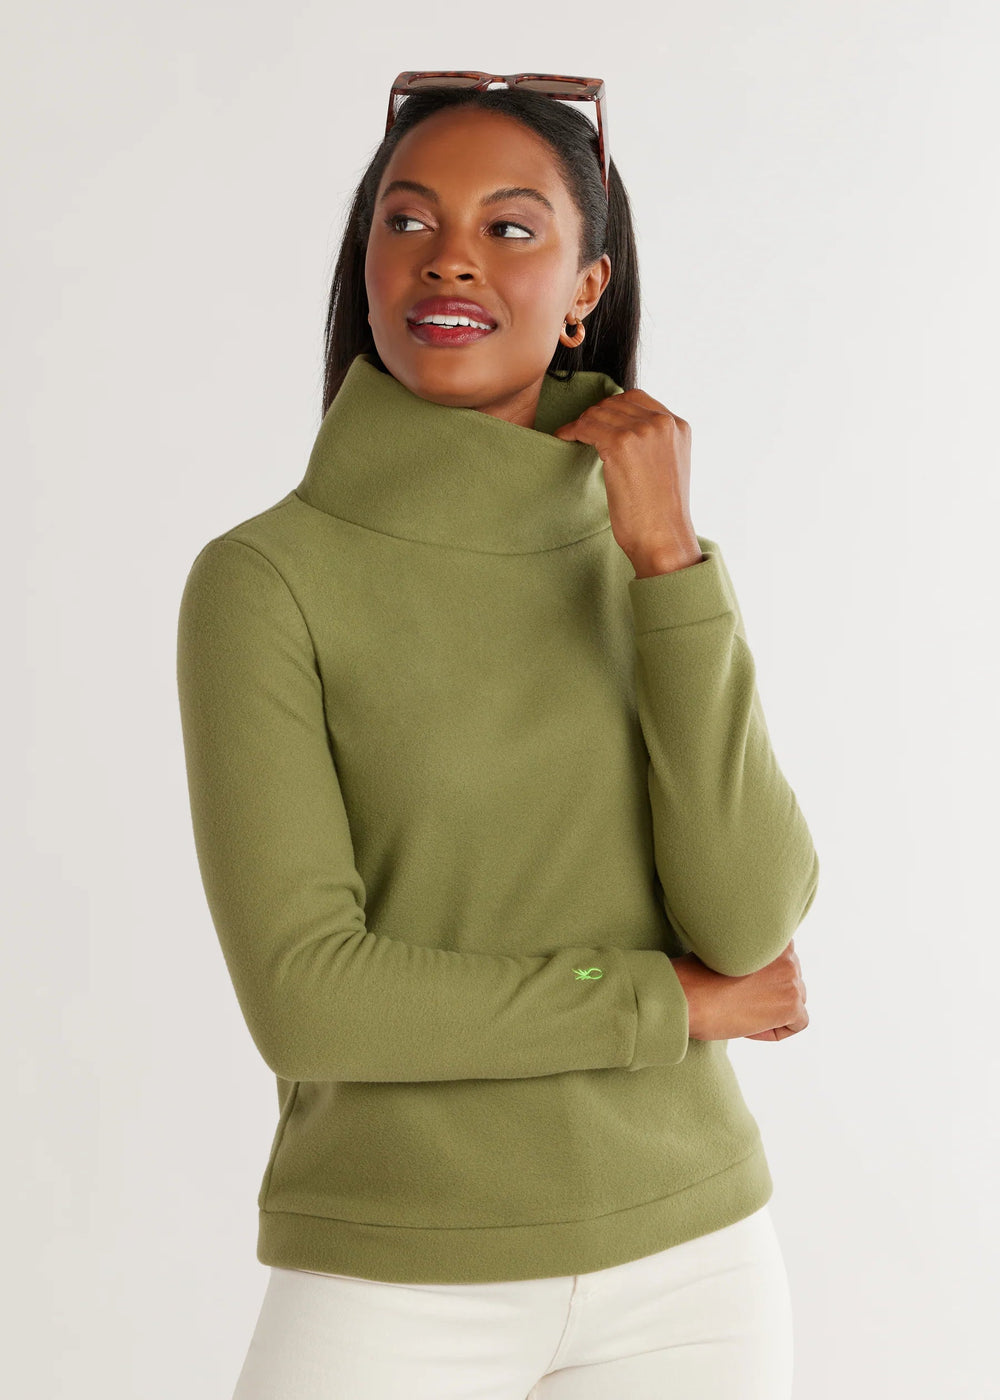 Dudley Stephens Sweater Park Slope Turtleneck in Army Green Vello Fleece